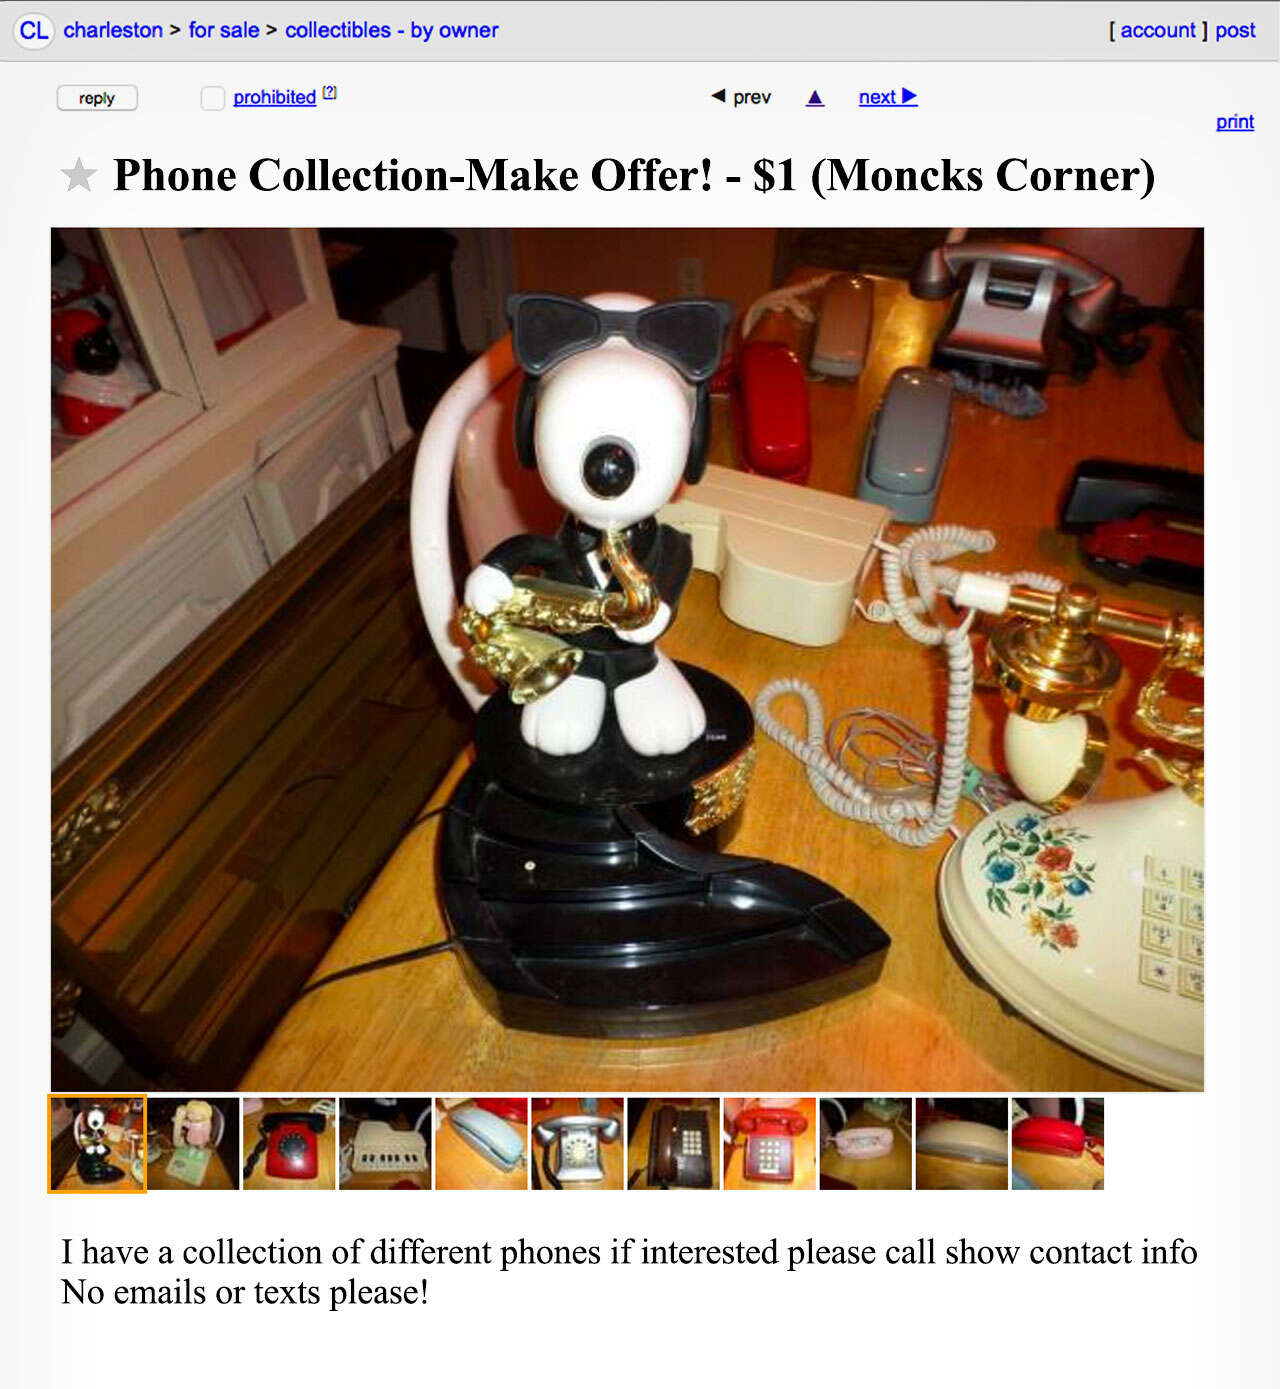 A Craigslist advertisement for a phone collection. 